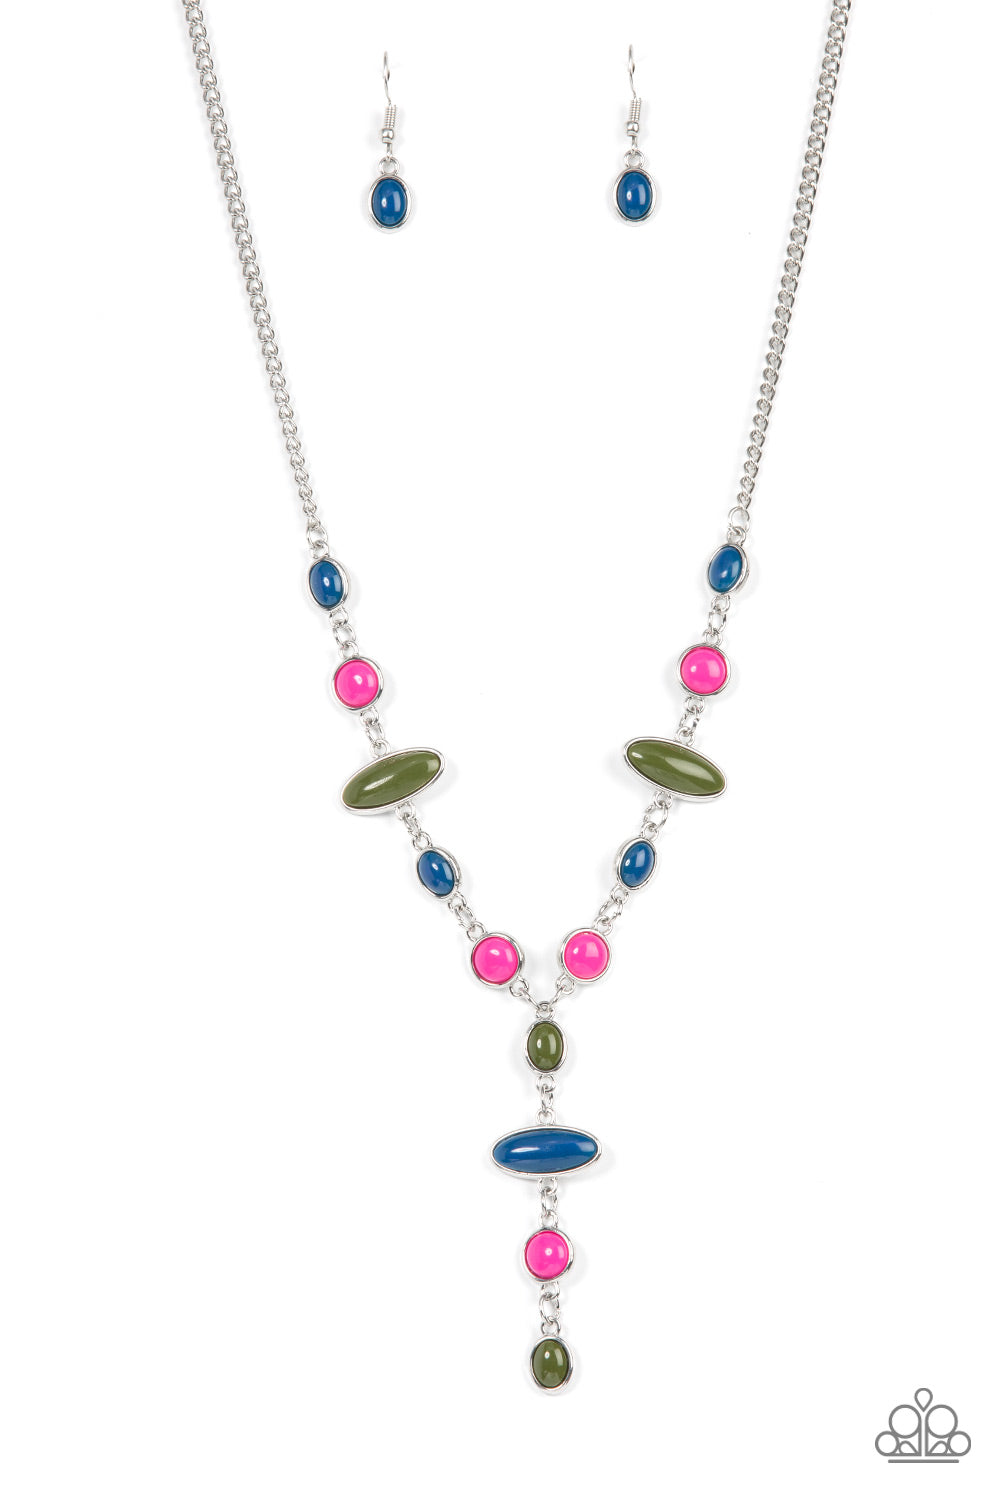 Authentically Adventurous Paparazzi Accessories Necklace with Earrings Multi